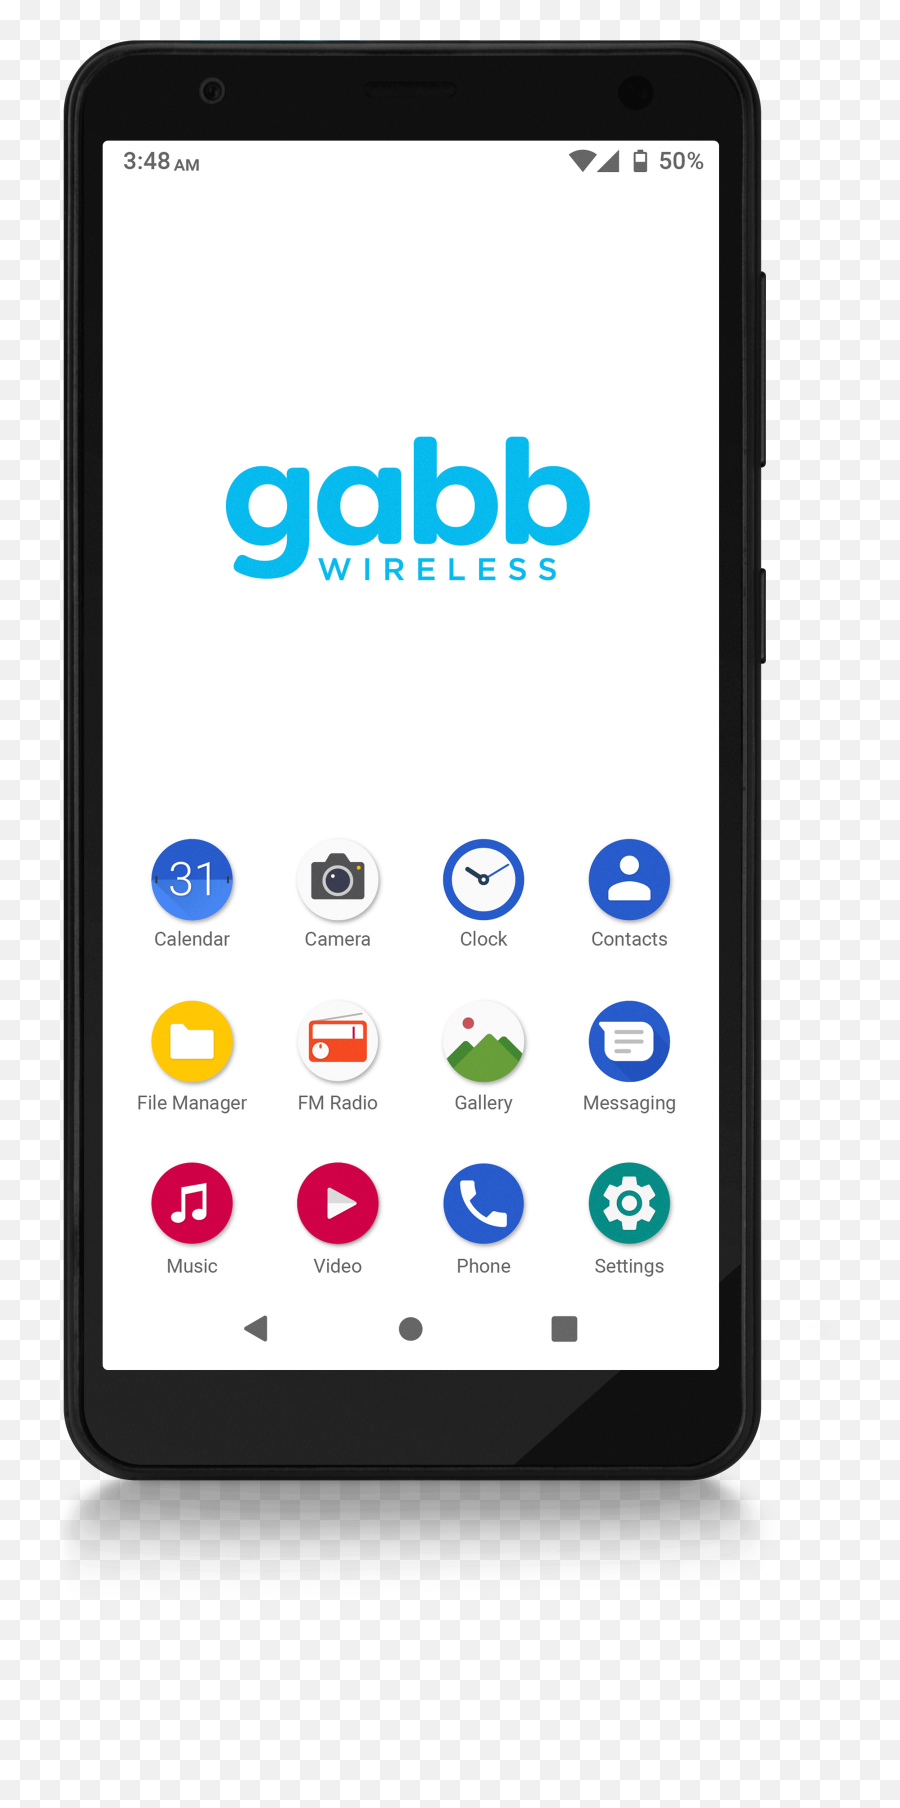 The Best Cell Phones For Kids To Help Them Stay Safe In 2021 - Gabb Z2 Emoji,32gb Mobile Phones With Good Emoticons